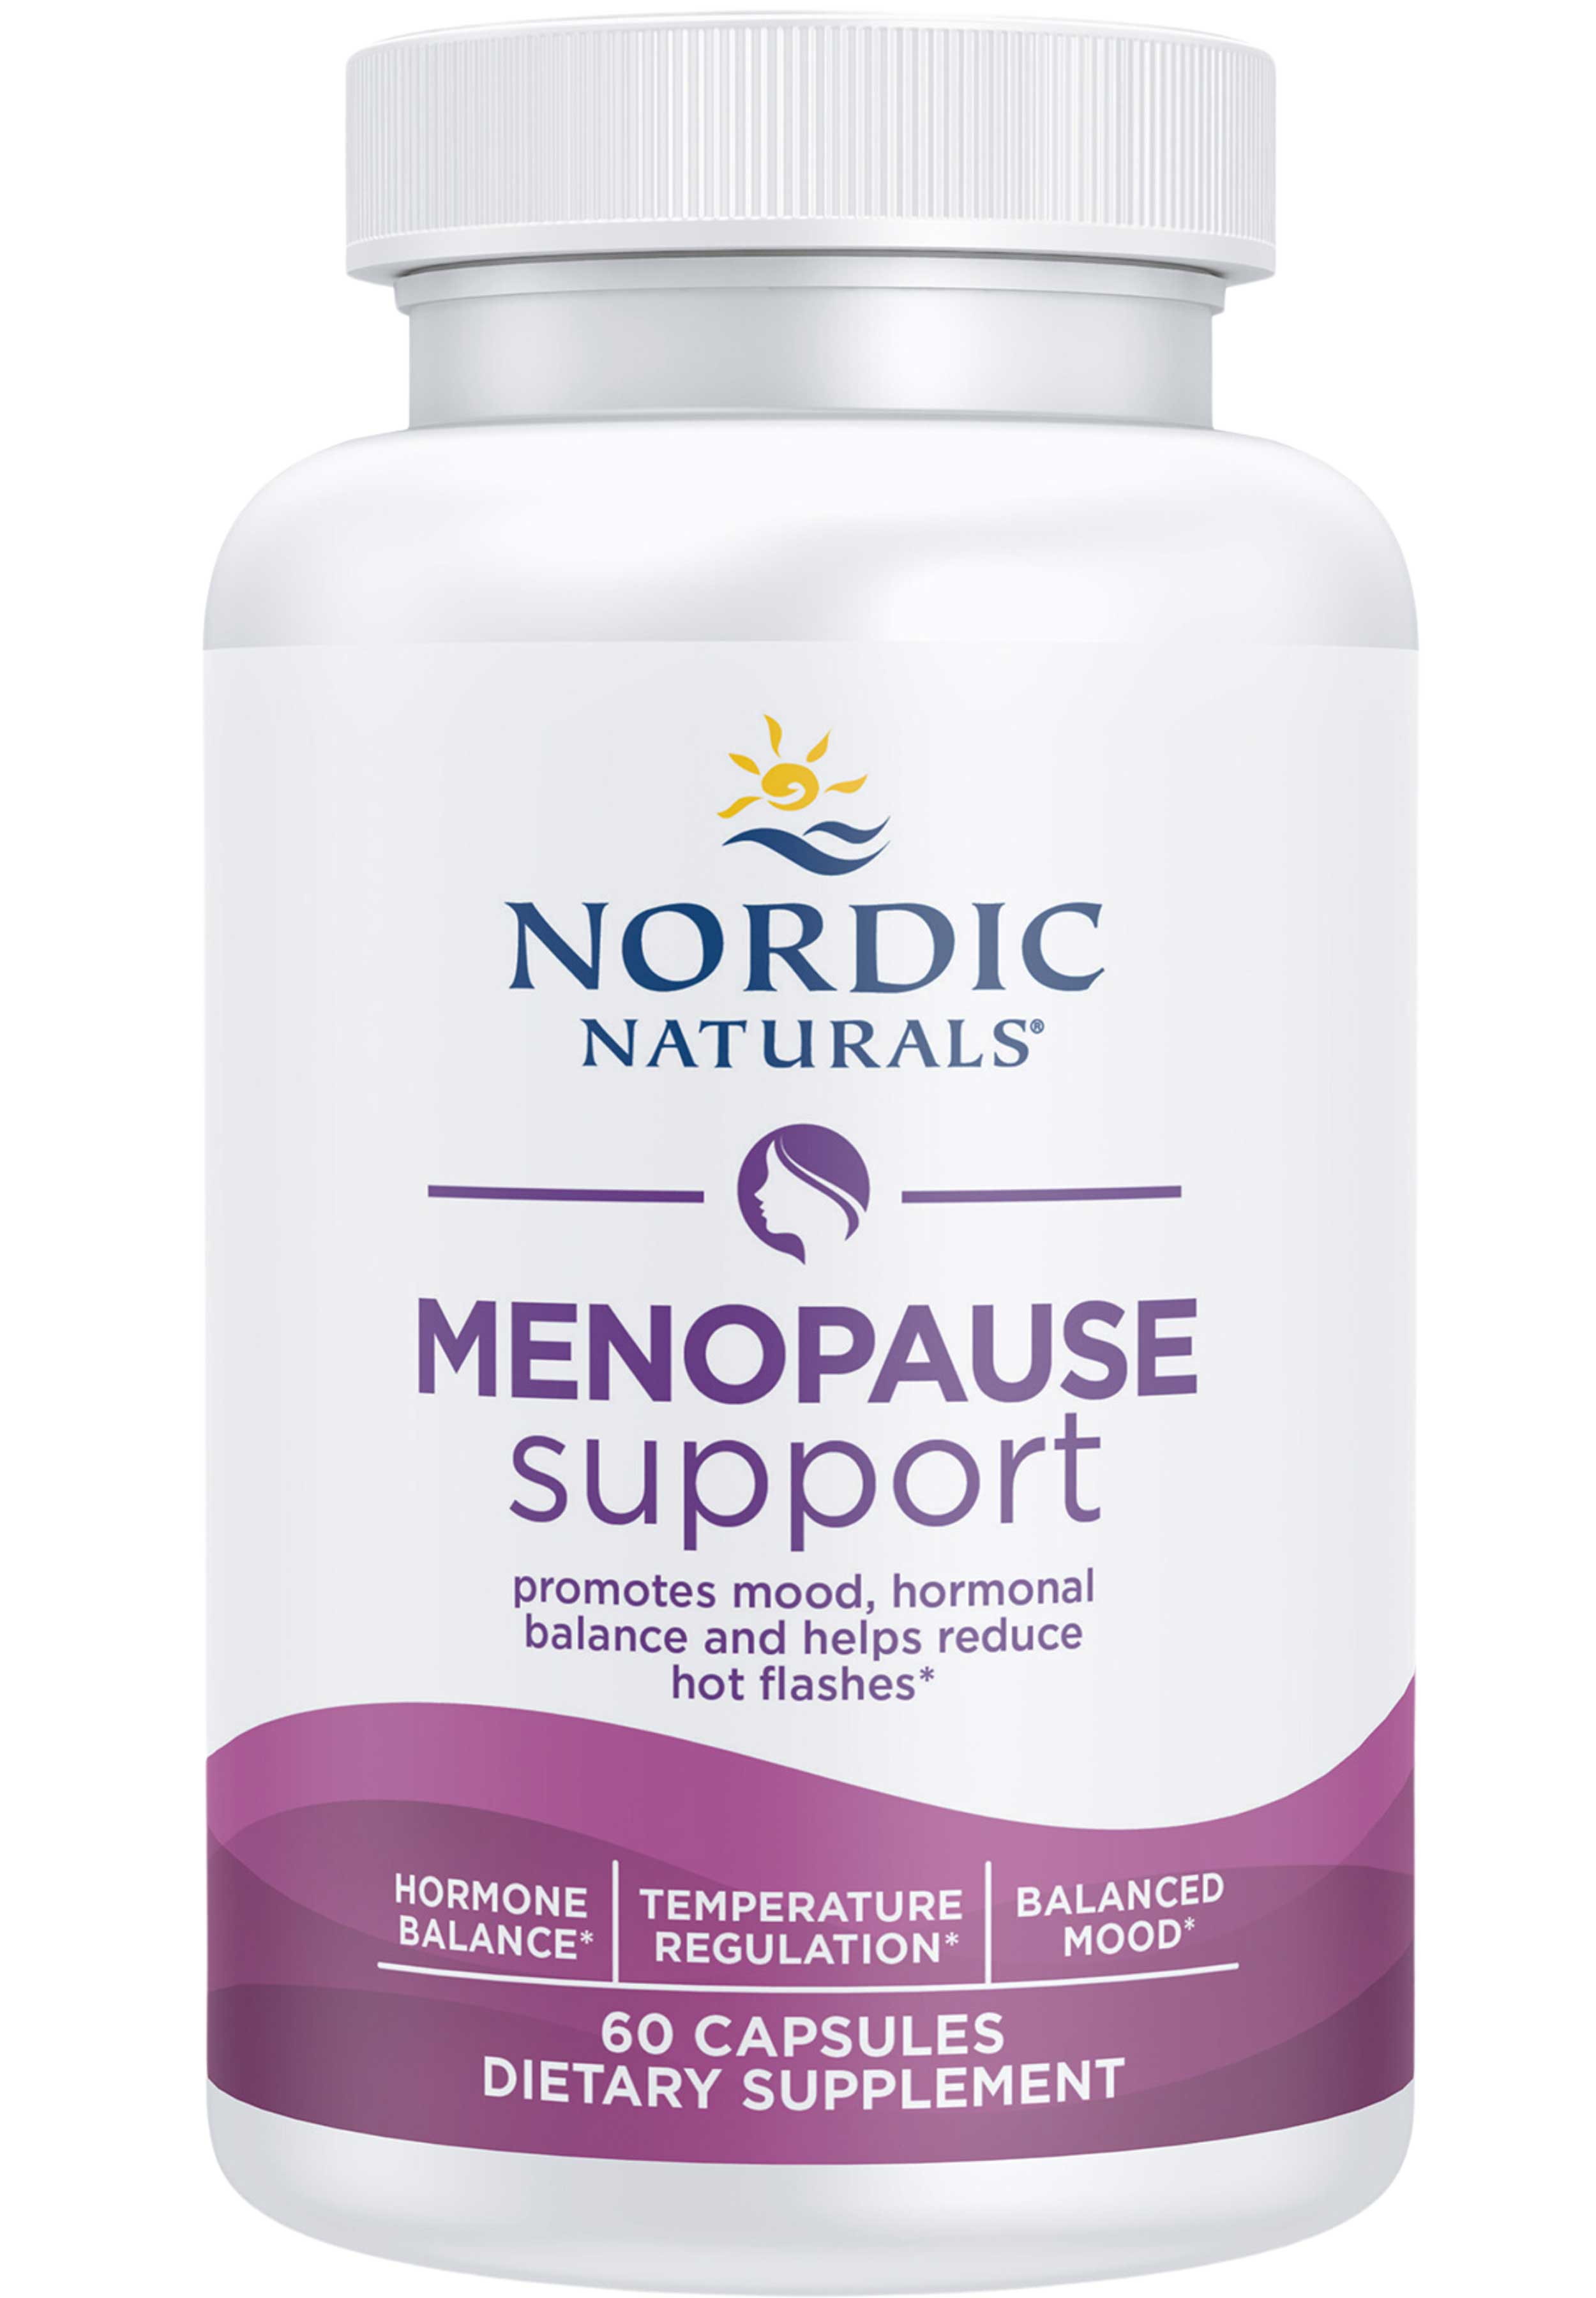 Nordic Naturals Menopause Support